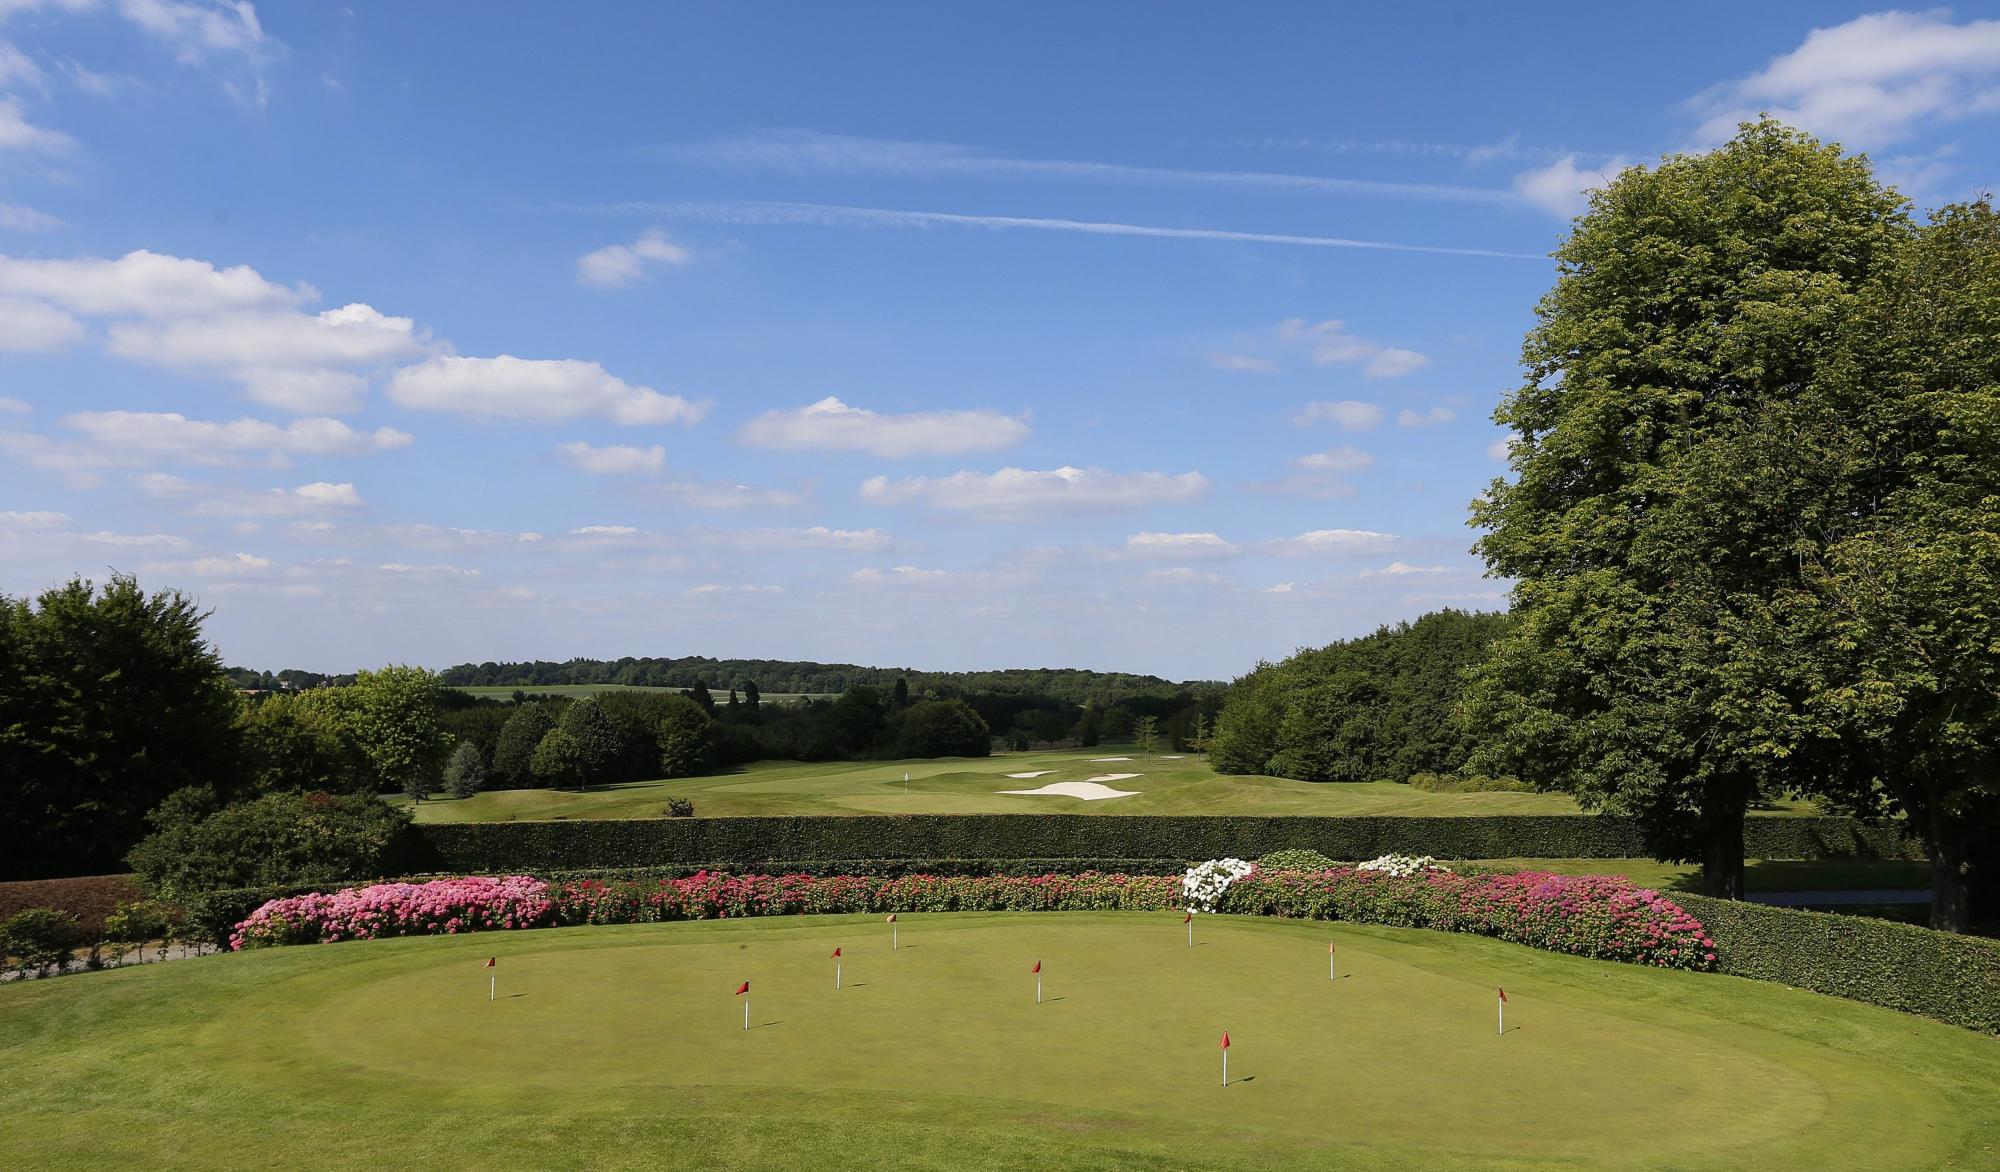 View Golf Club de Hulencourt's lovely golf course in amazing Brussels Waterloo & Mons.